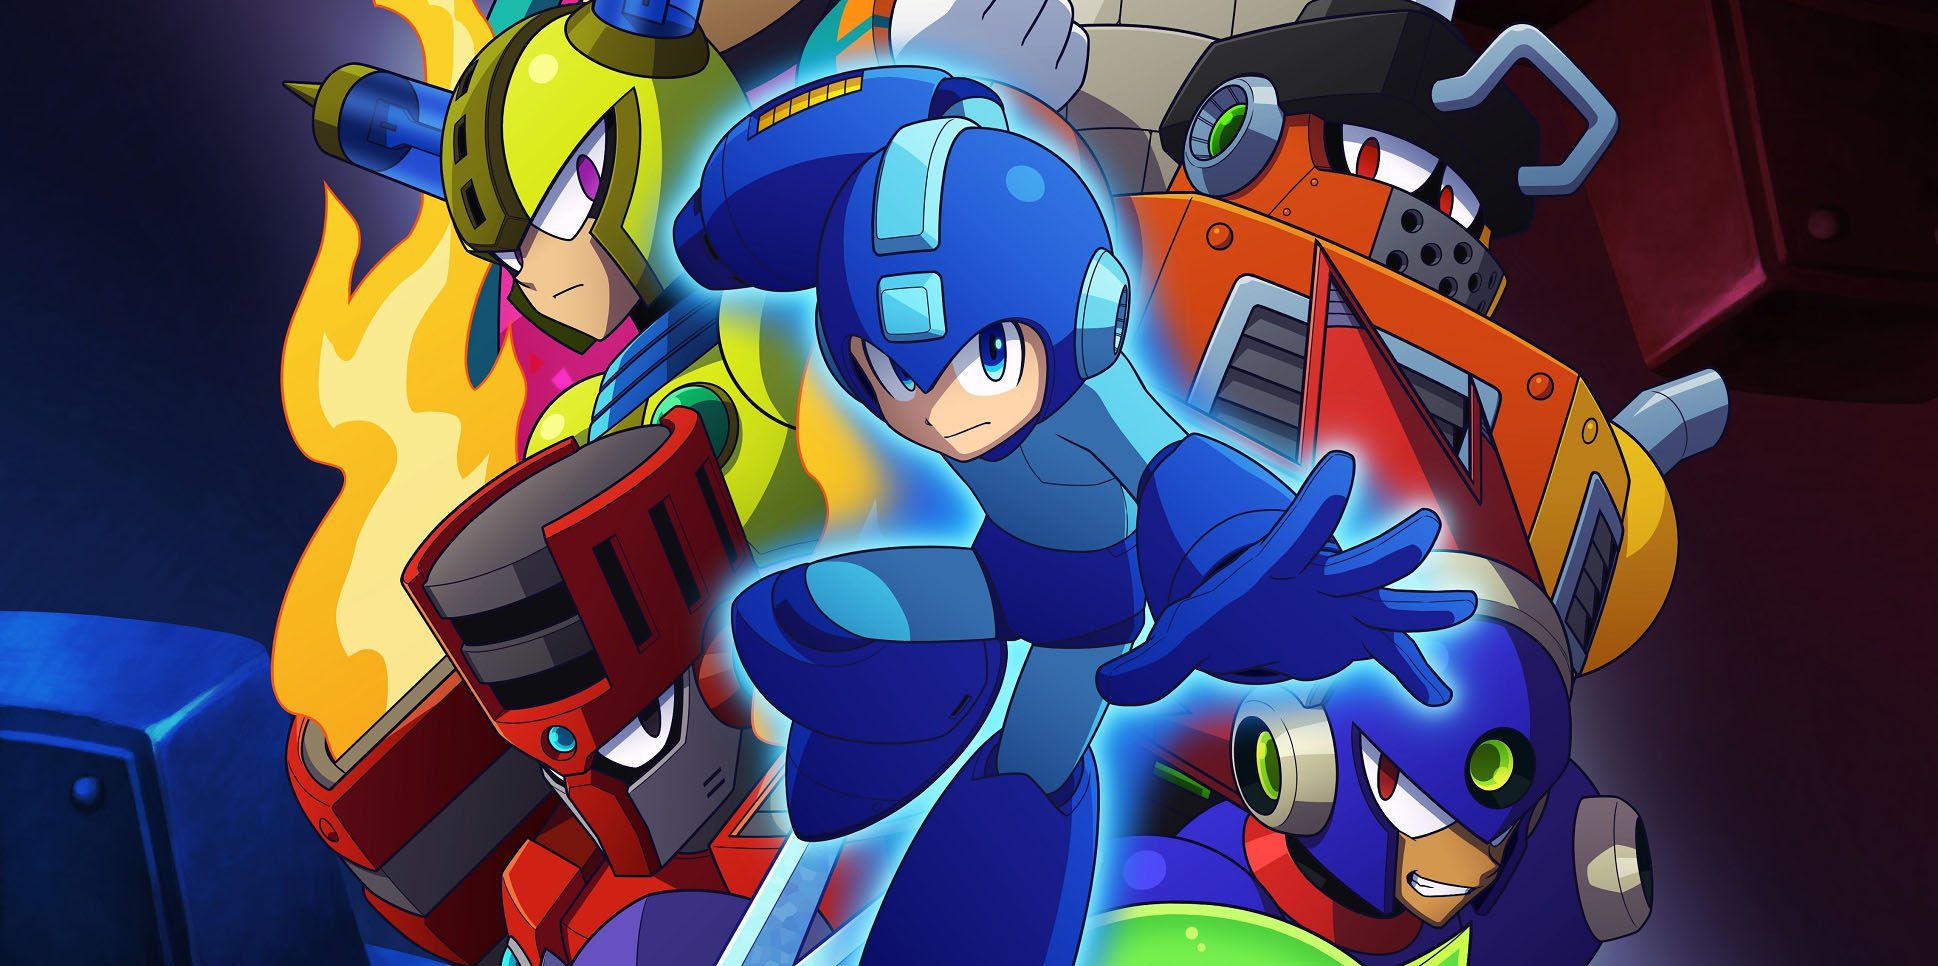 Our hands-on preview of Mega Man 11 at E3 2018